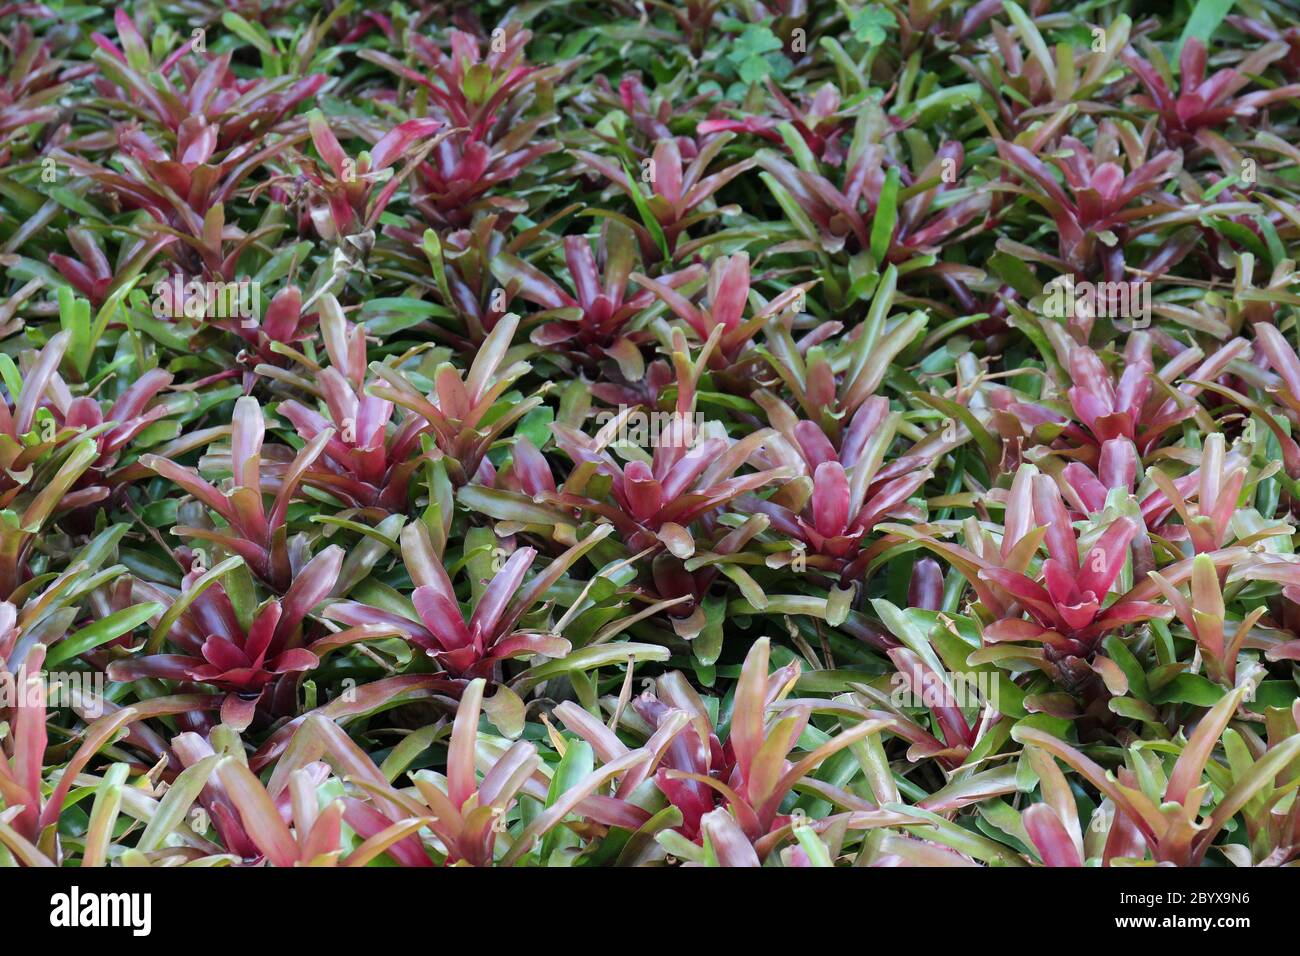 A group of Neoregelia Fireball Bromeliad plants with red and green leaves growing in a garden Stock Photo